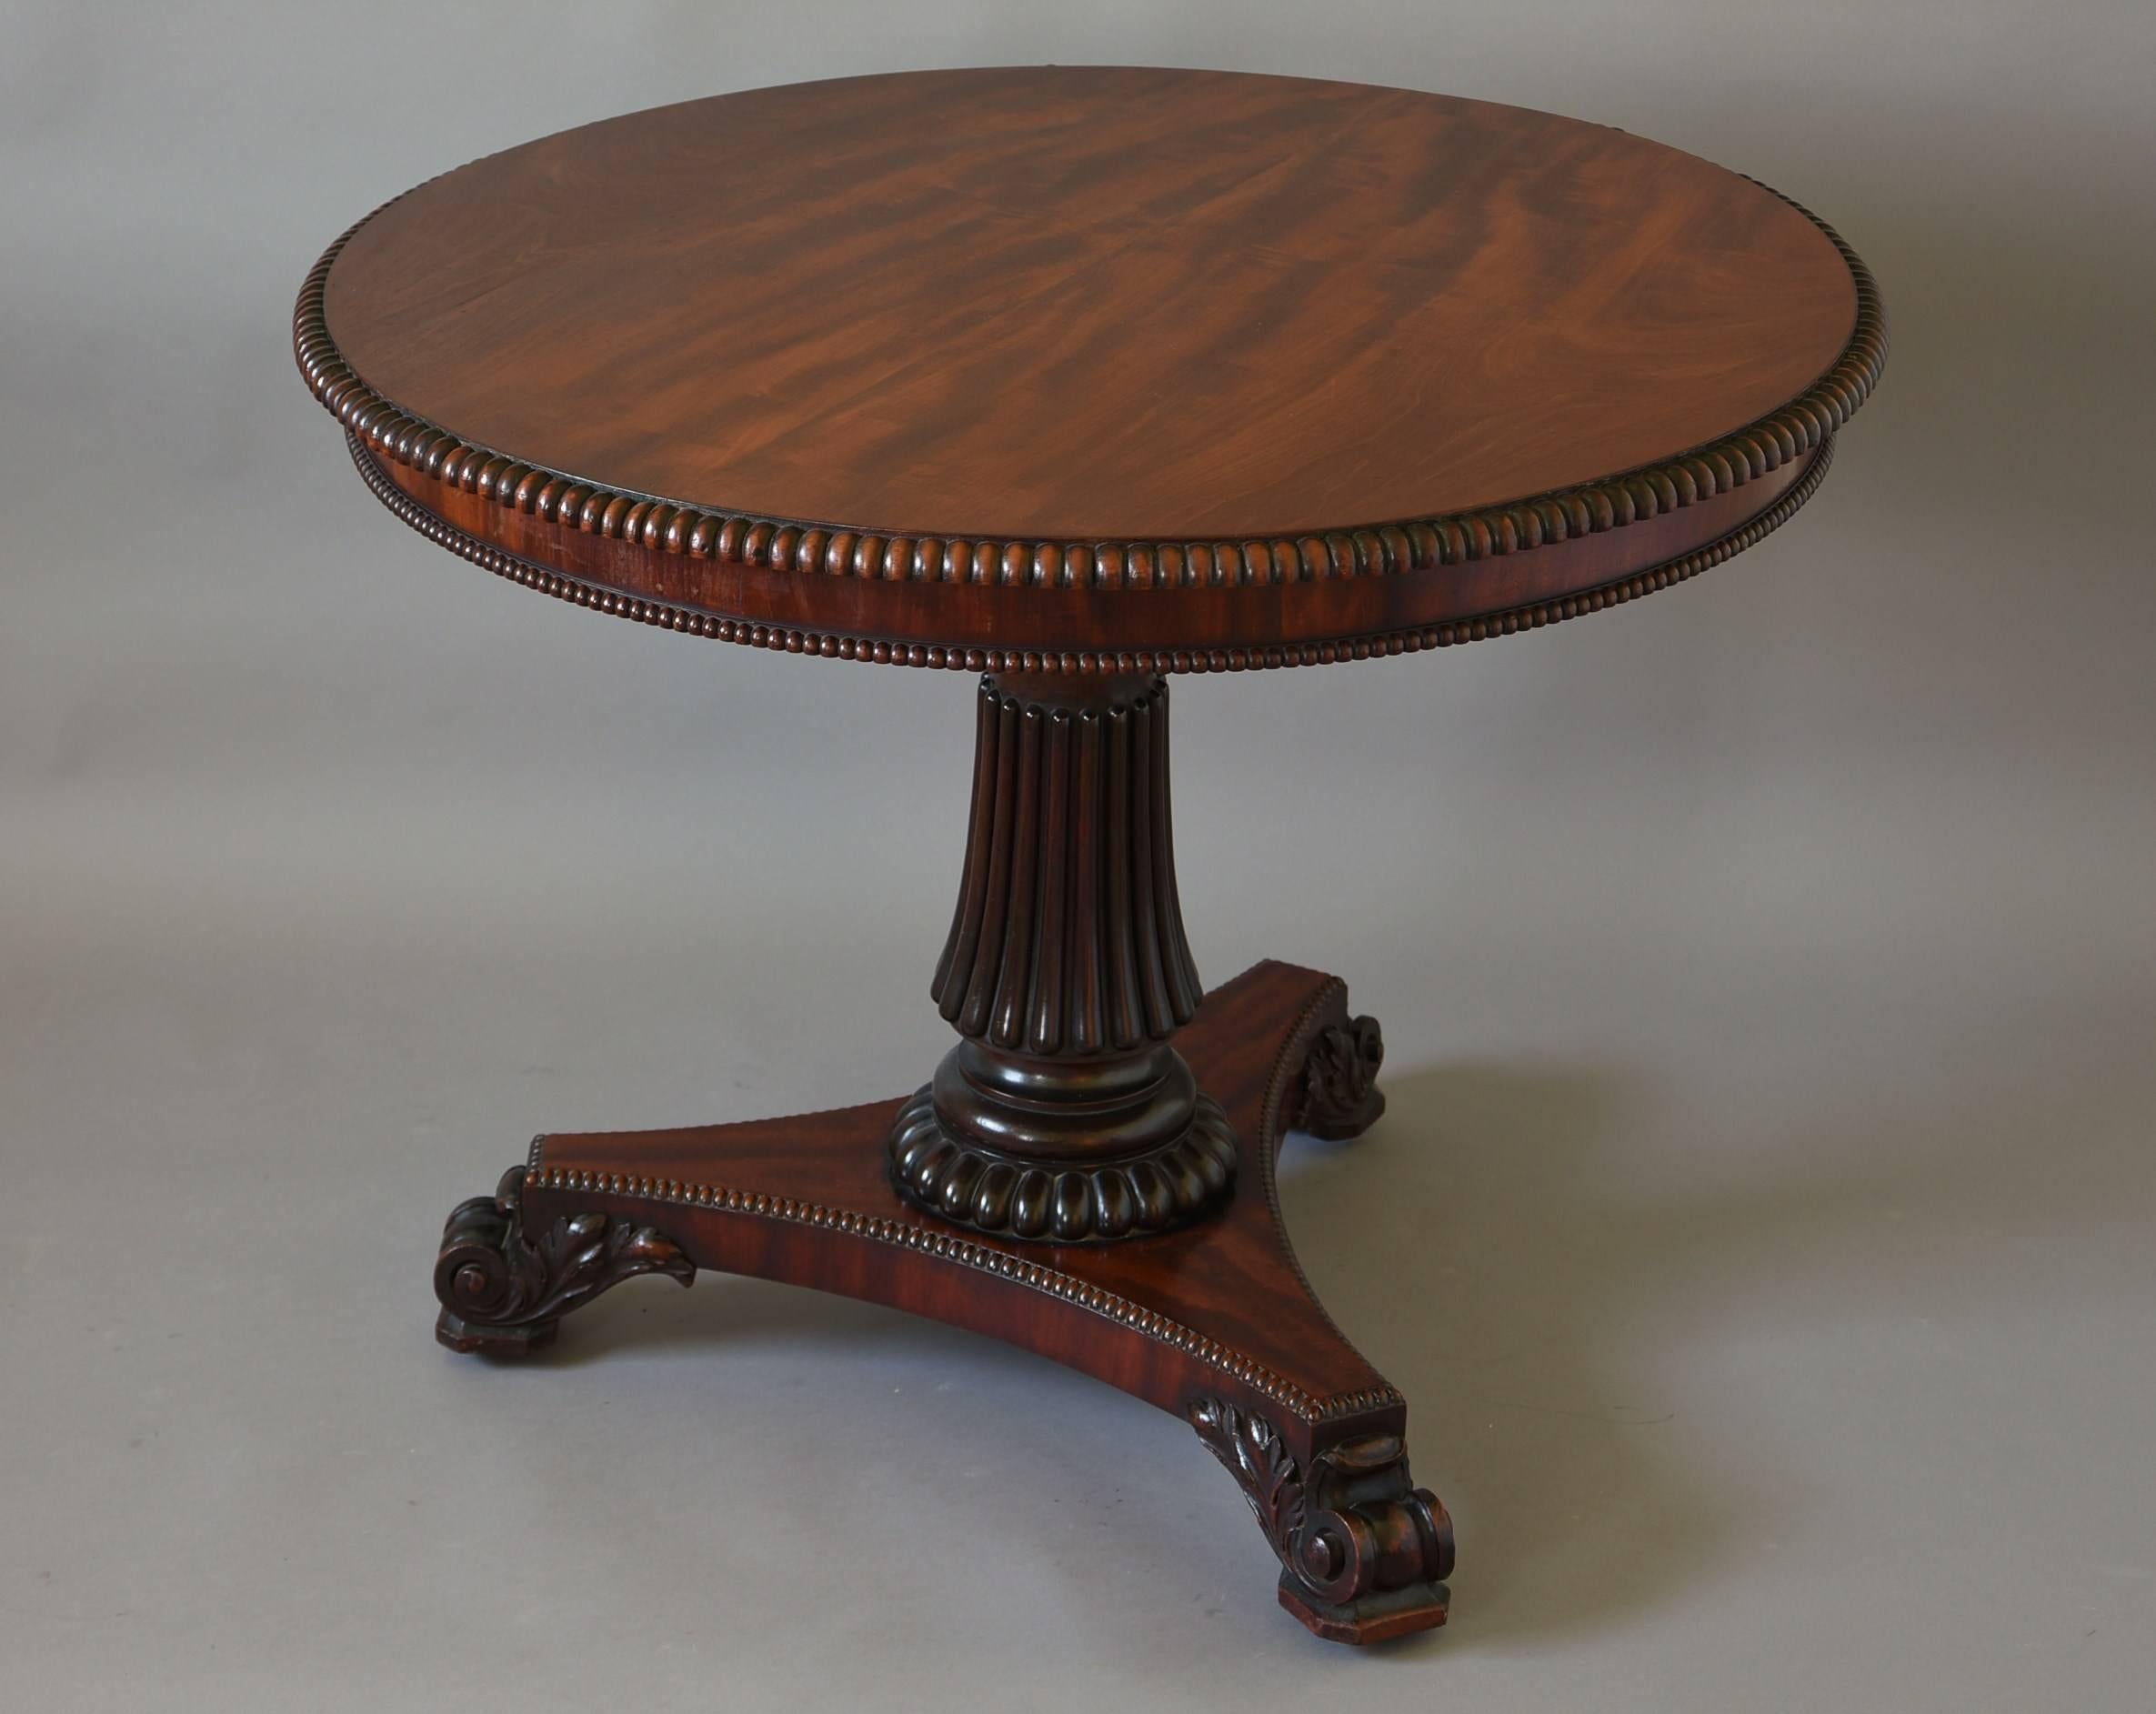 An early/mid-19th century mahogany tilt-top centre table of superb quality in the manner of Gillows.

This table consists of a superb quality mahogany veneered tilt-top with a turned applied moulding to the edge giving the appearance of gadrooning